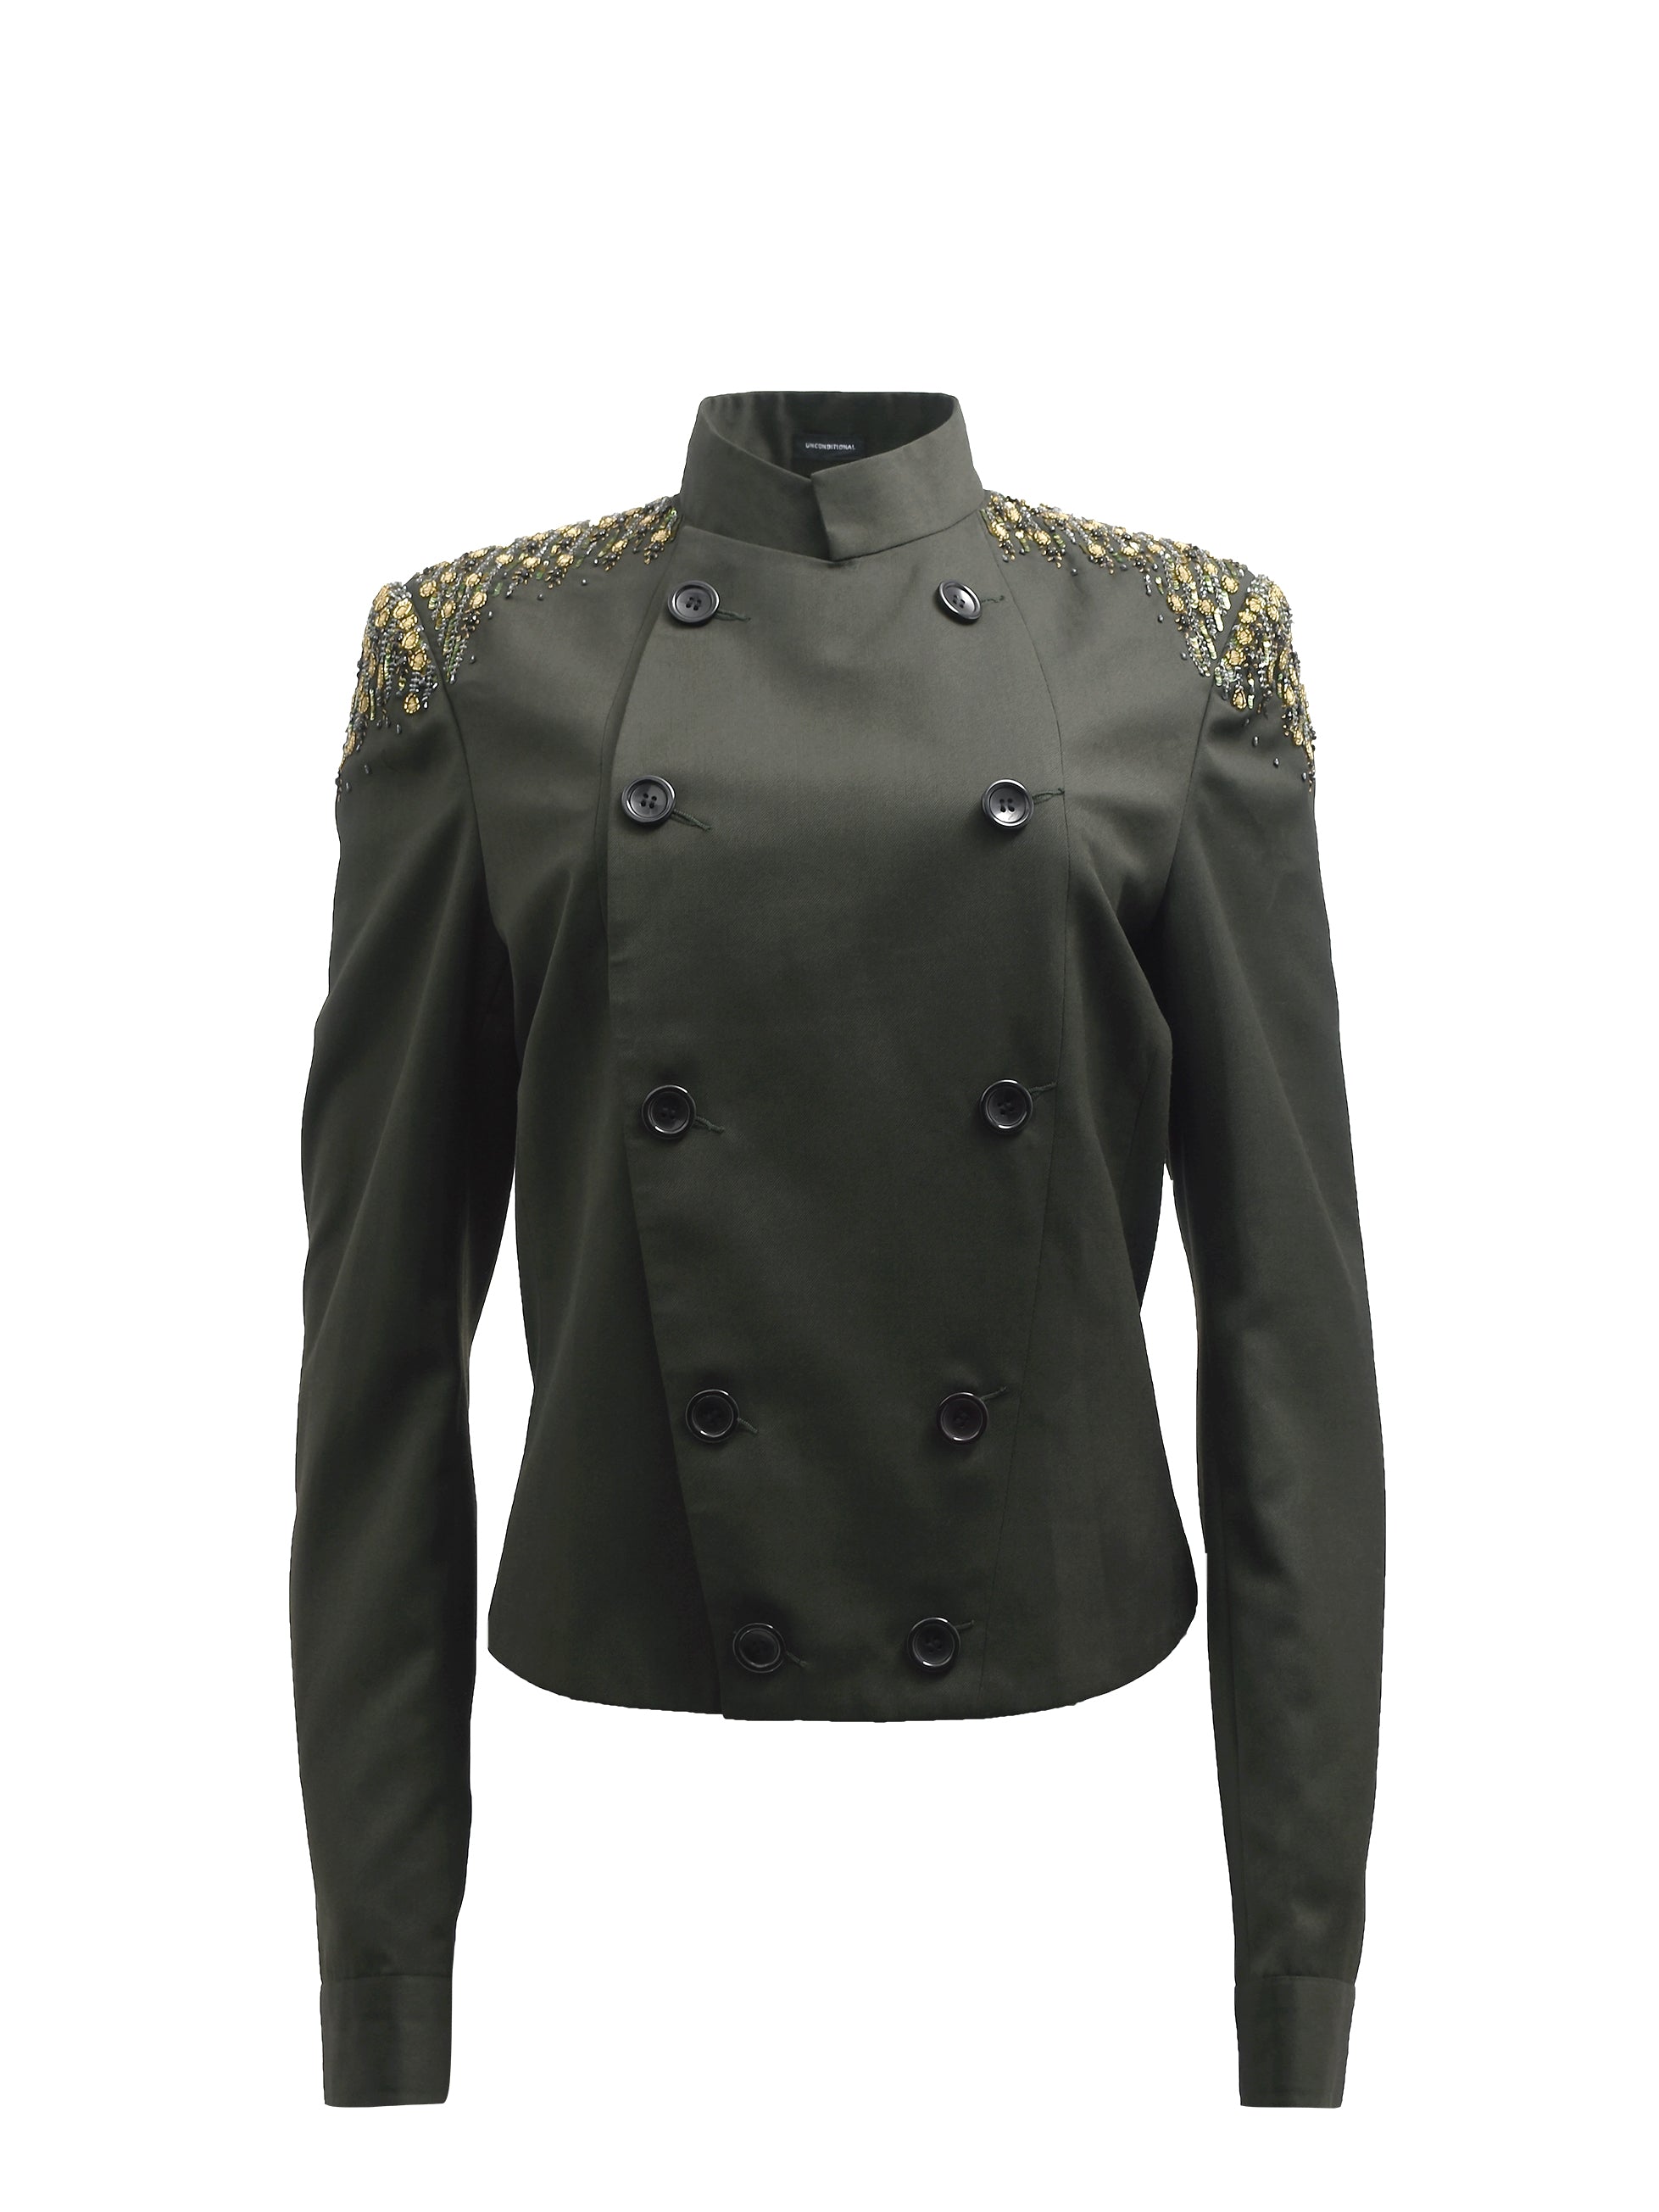 CROPPED FITTED JACKET WITH SEQUIN DETAILING IN DARK GREEN